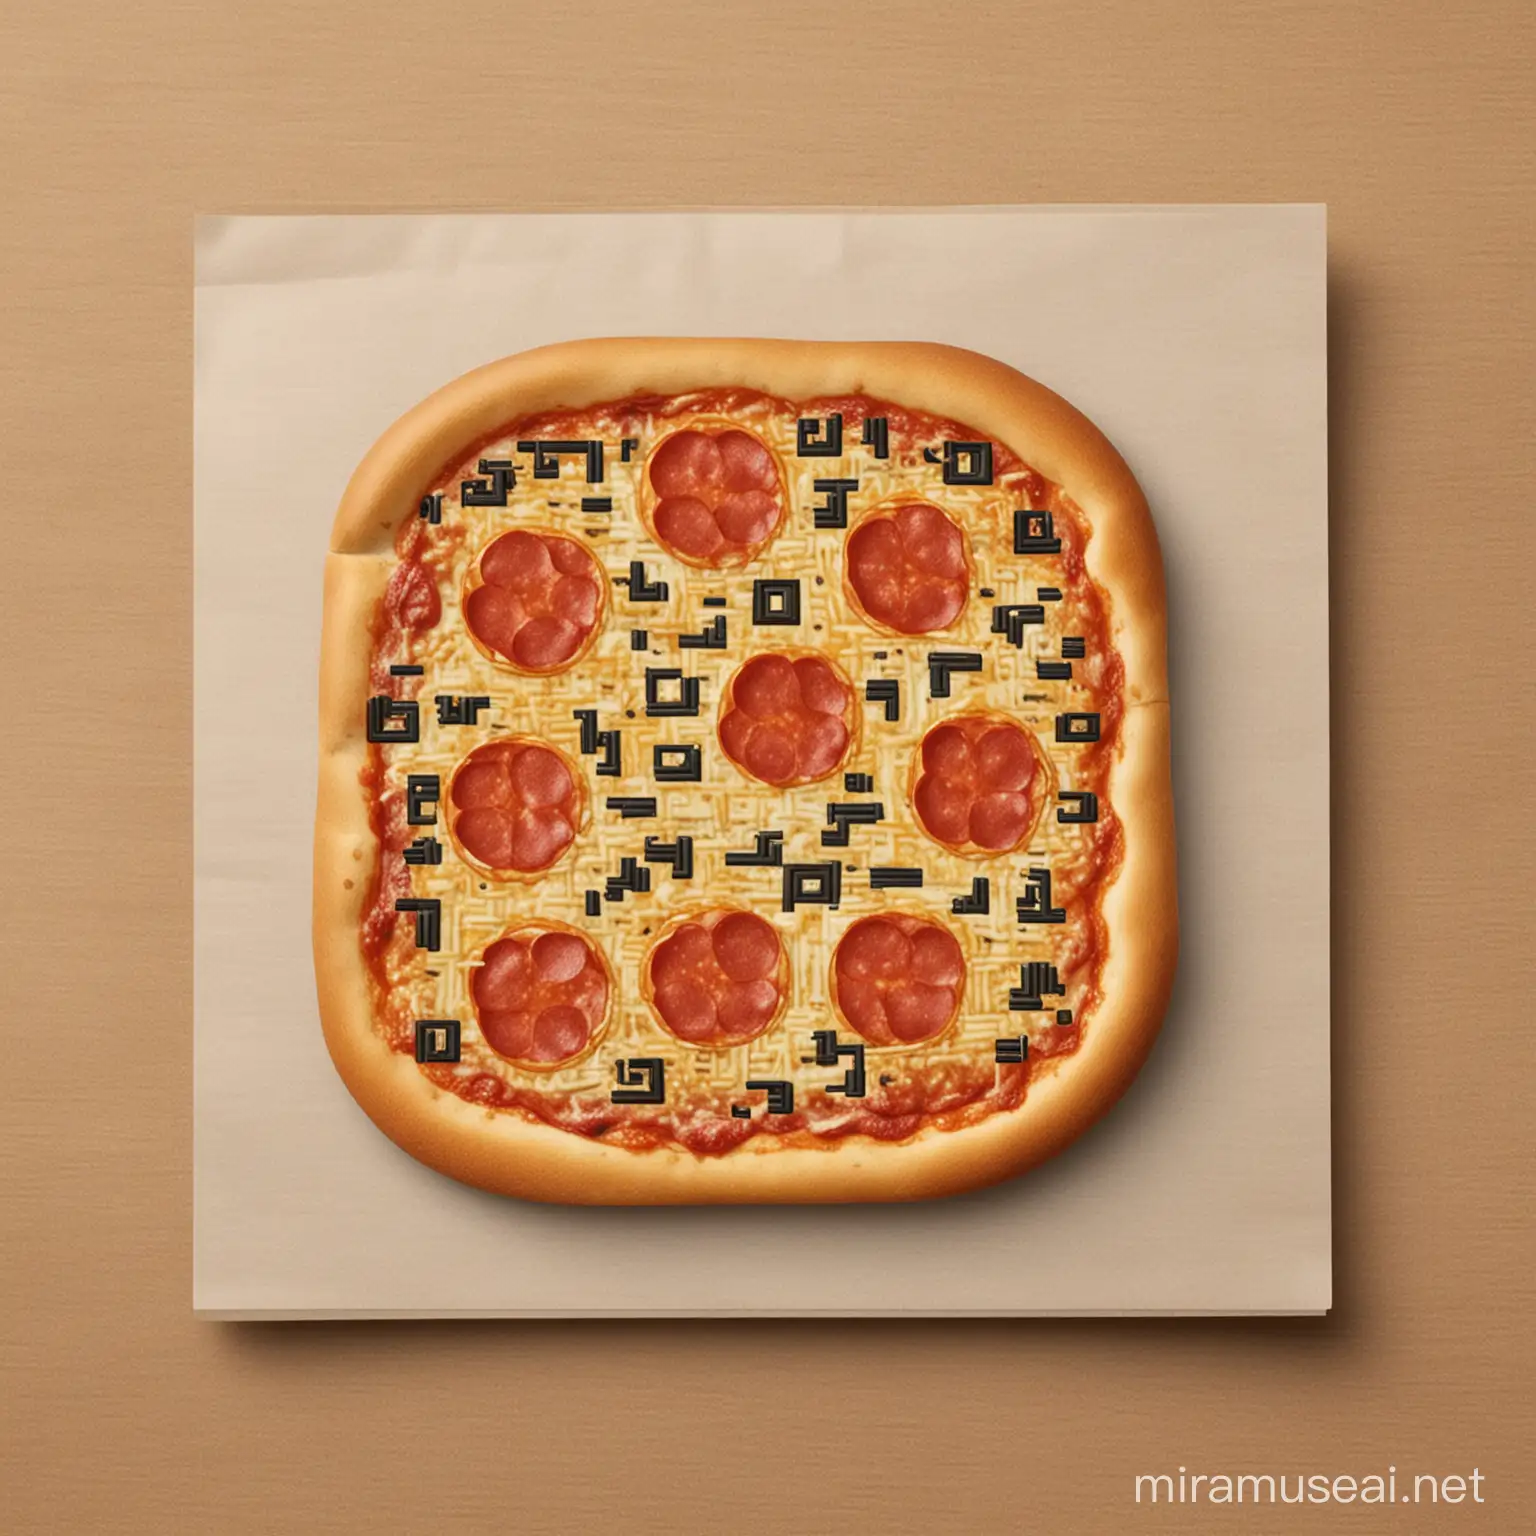 generate a simple shape QR code filled with the pizza